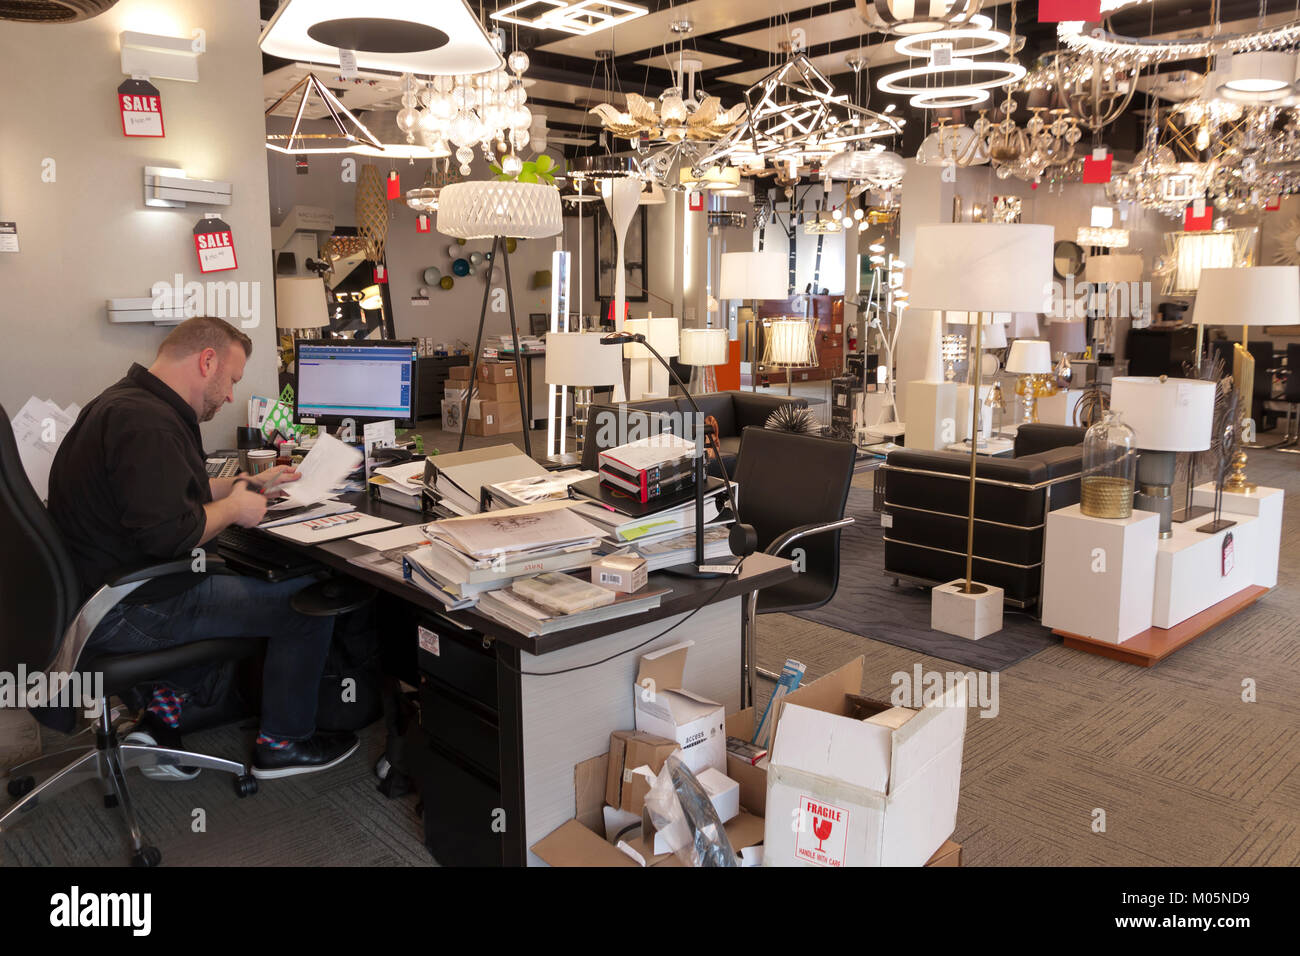 Employee working at his desk within a retail lighting store. Stock Photo